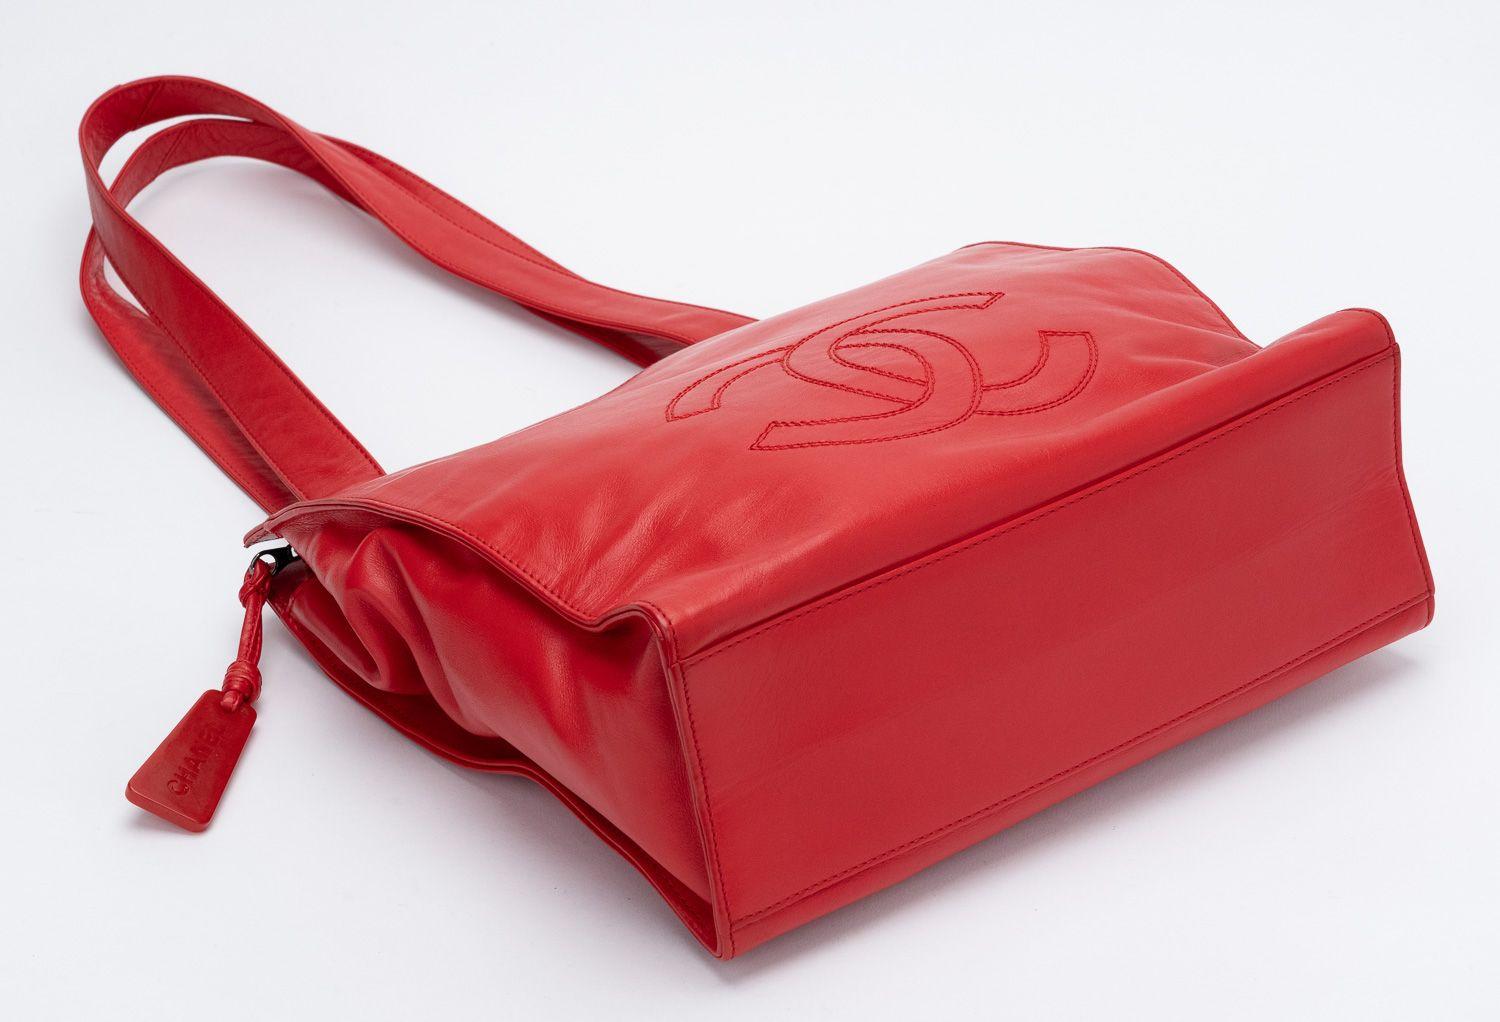 Chanel Vintage Lambskin Tote Bag Red For Sale 1